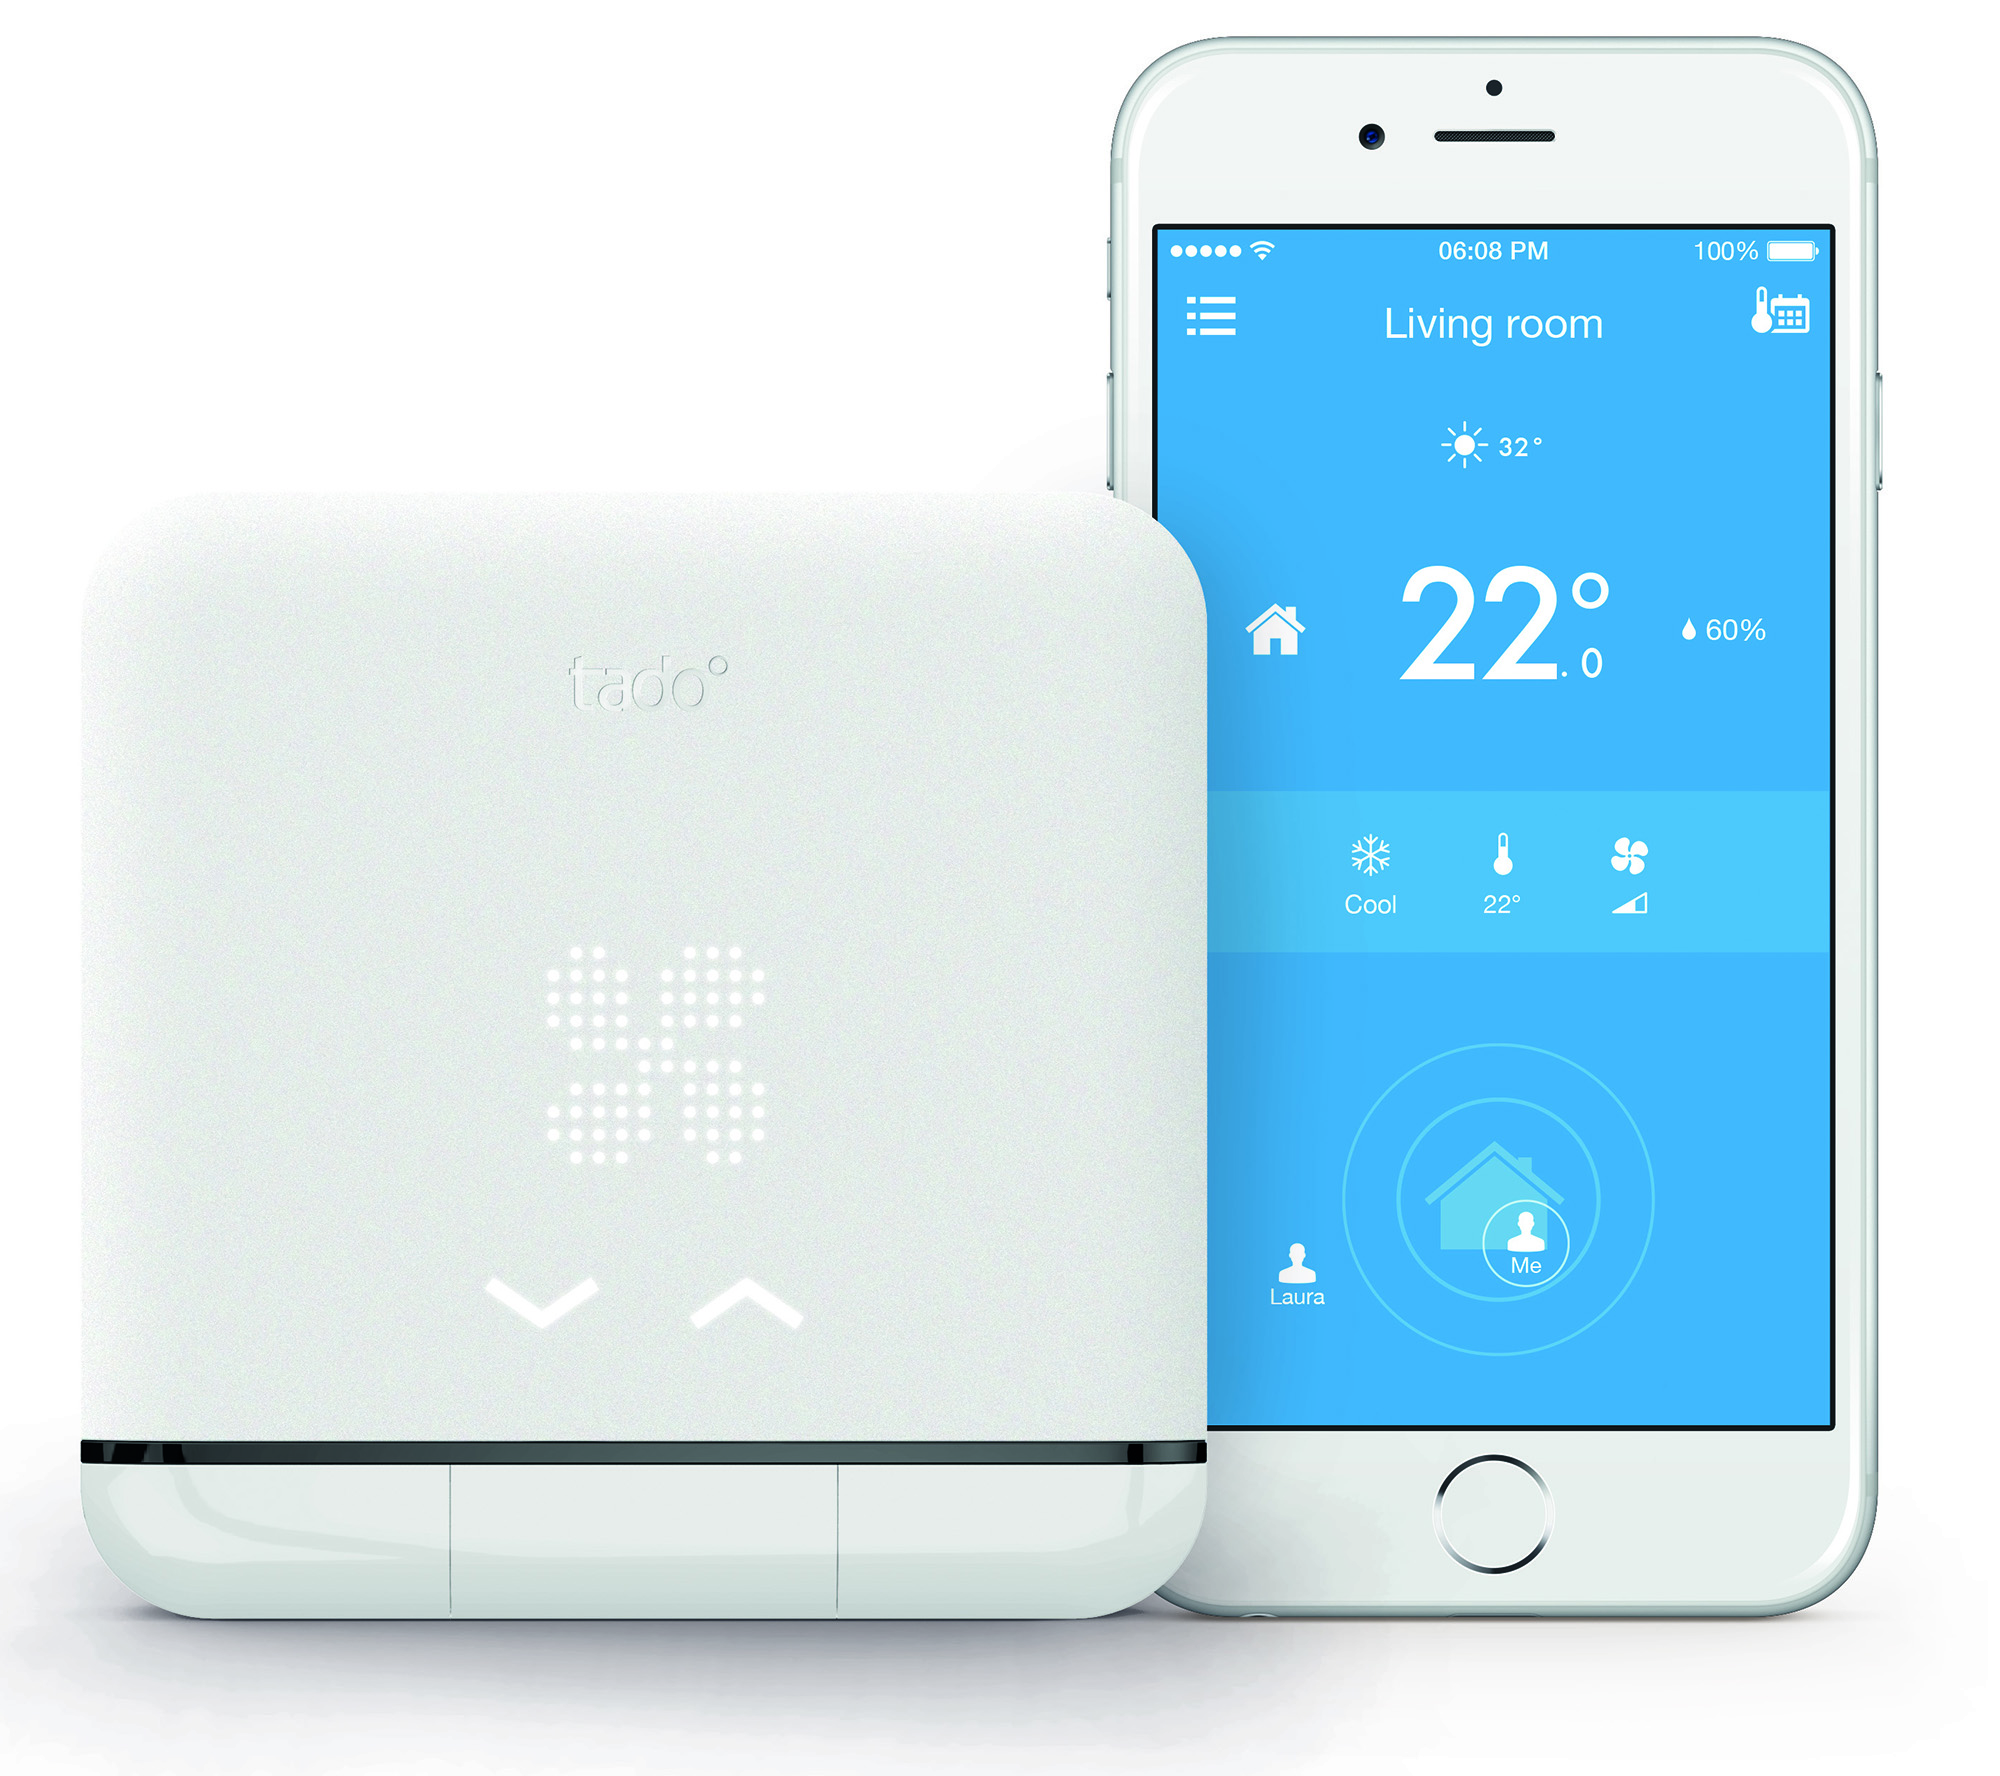 The Smart Control from tado° lets your iPhone control your existing conditioner